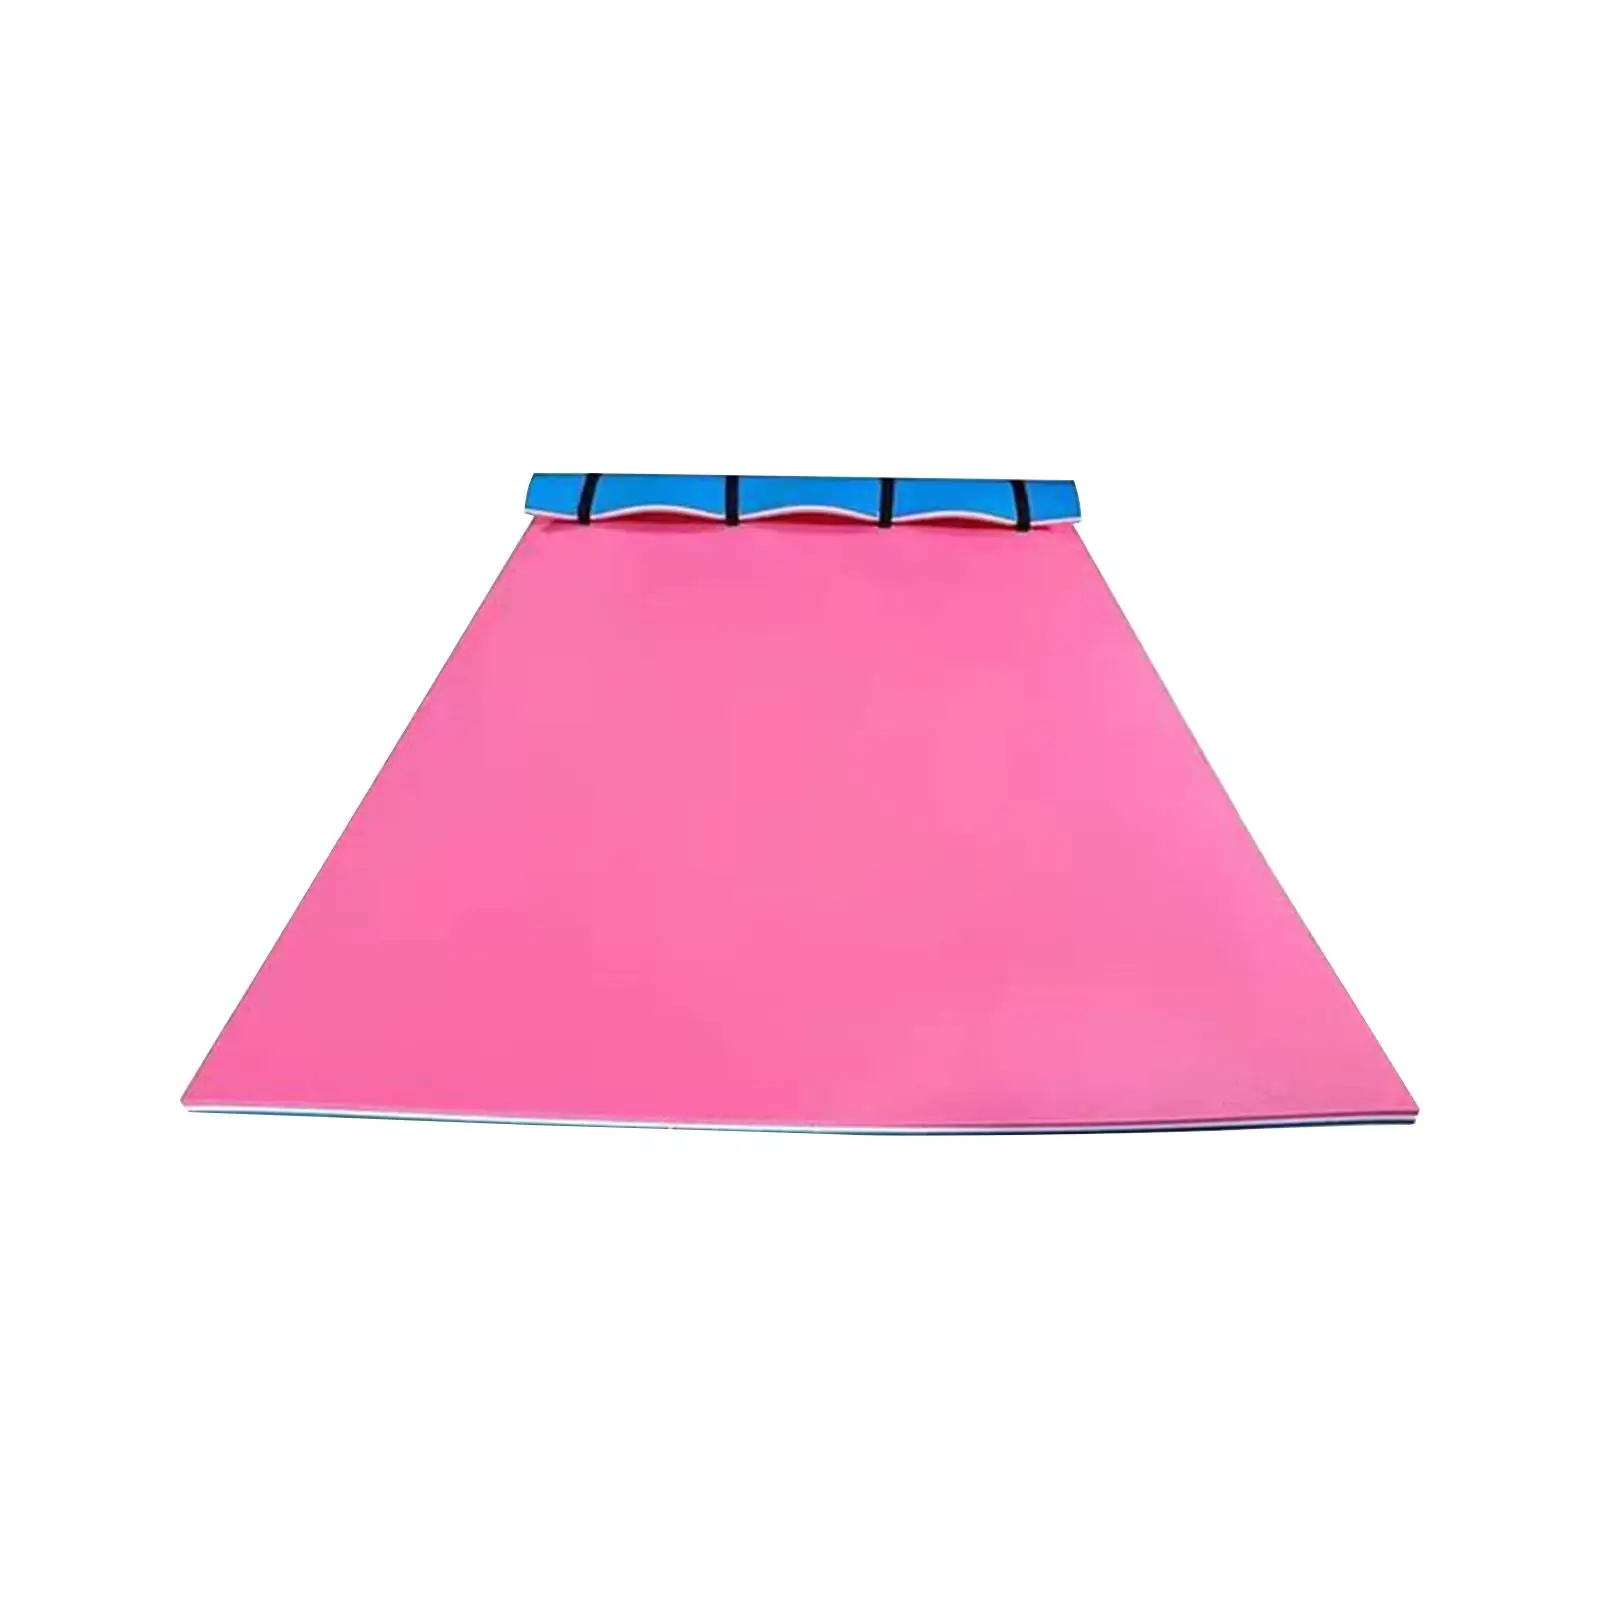 Pool Water Floating Mat 3 Layer Water Raft 270x90x3.3cm for Water Parks, Pools, Lakes, Beaches and Sea Lightweight Roll up Pad